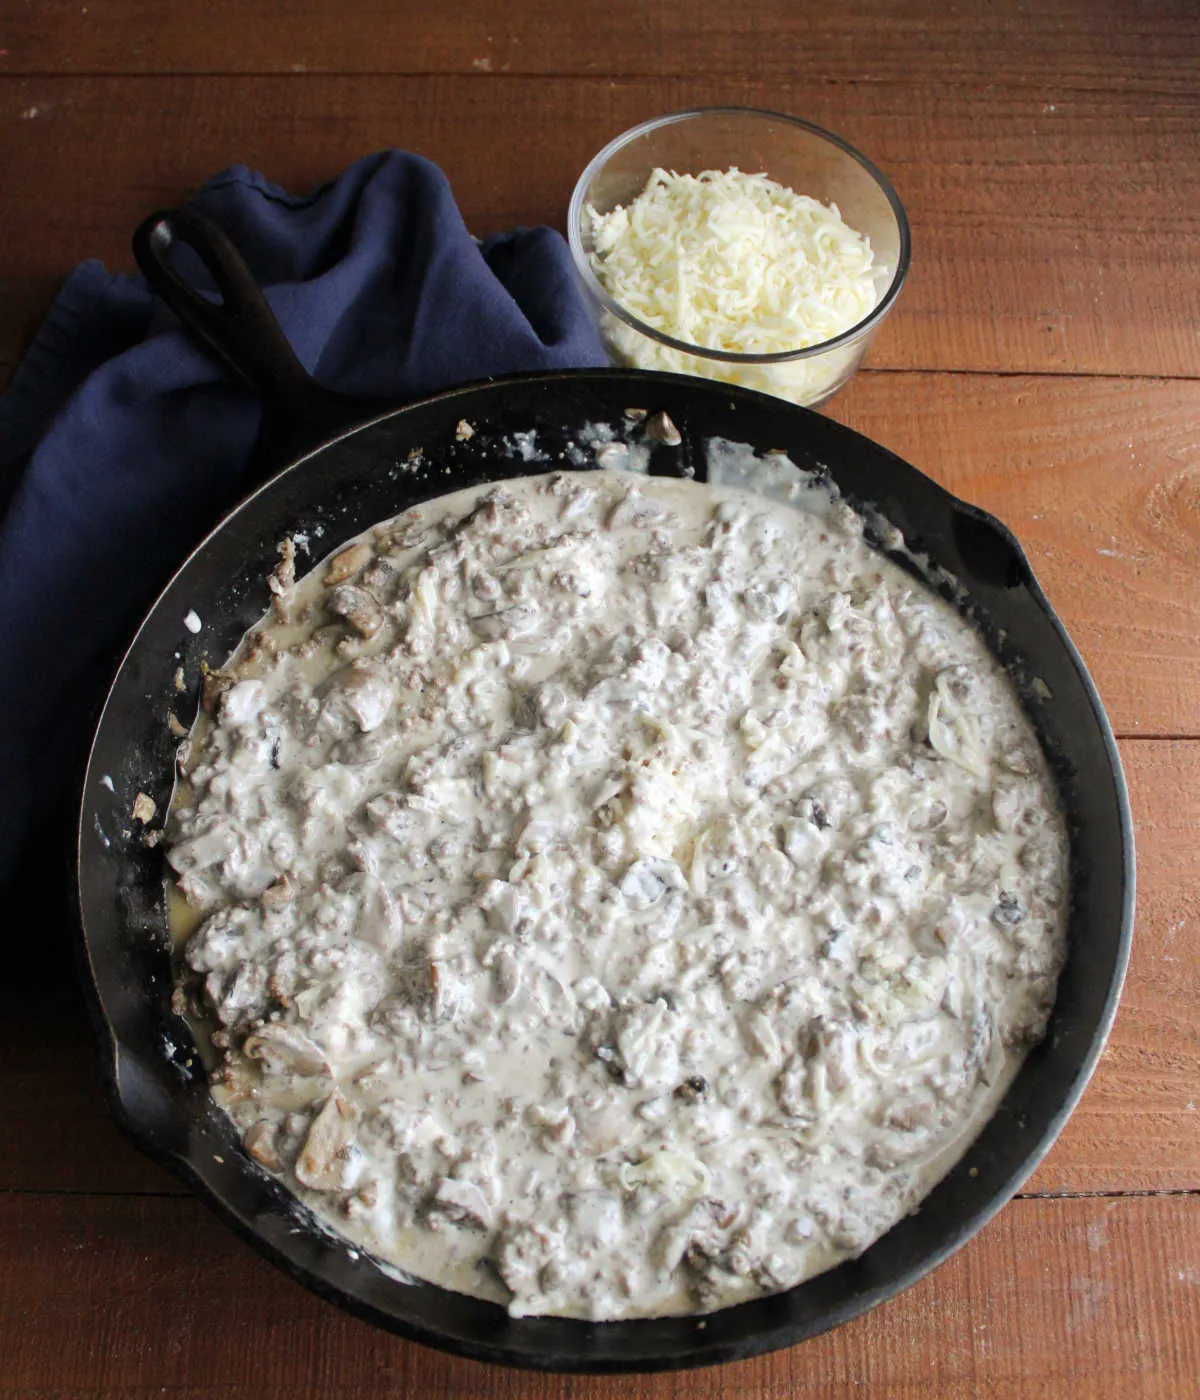 Cast iron skillet filled with creamy stuffed mushroom dip mixture with bowl of shredded cheese nearby.